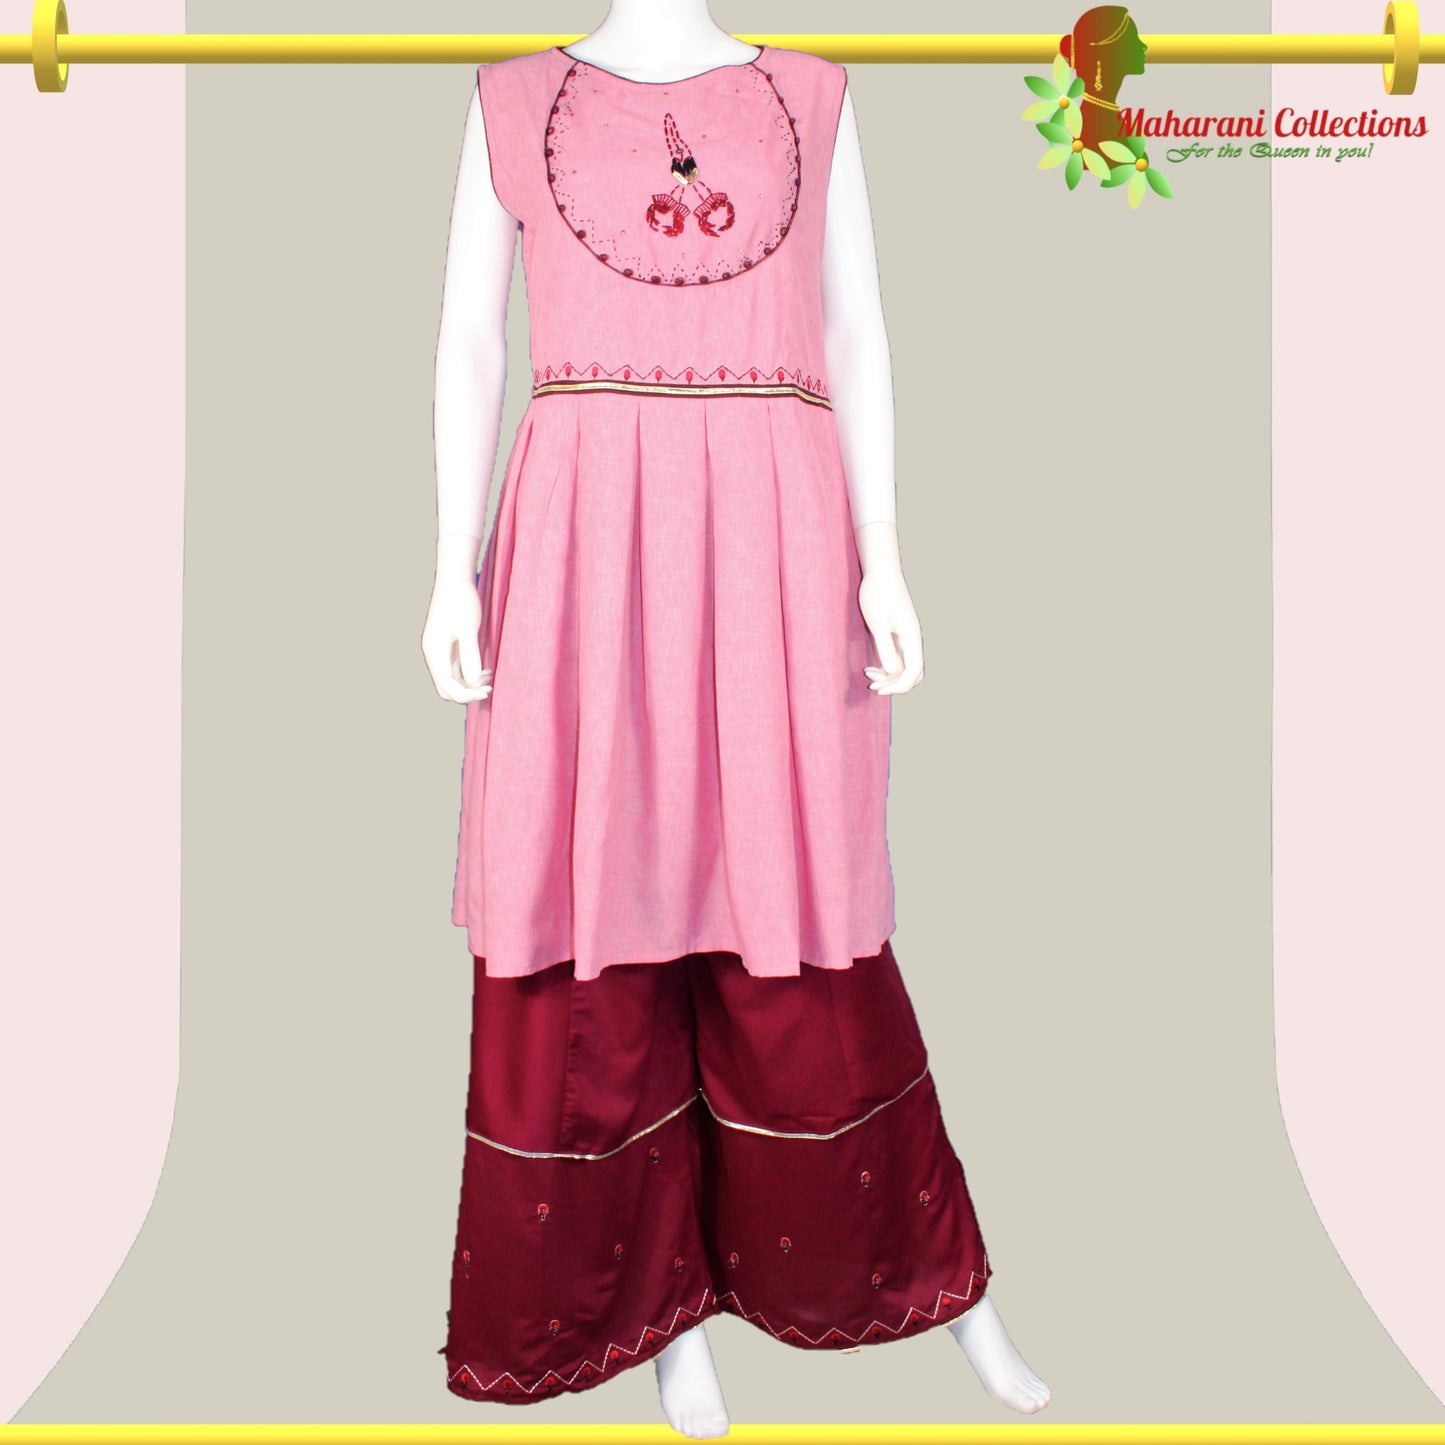 Lucknowi Sharara Suit - Pink and Maroon (L)